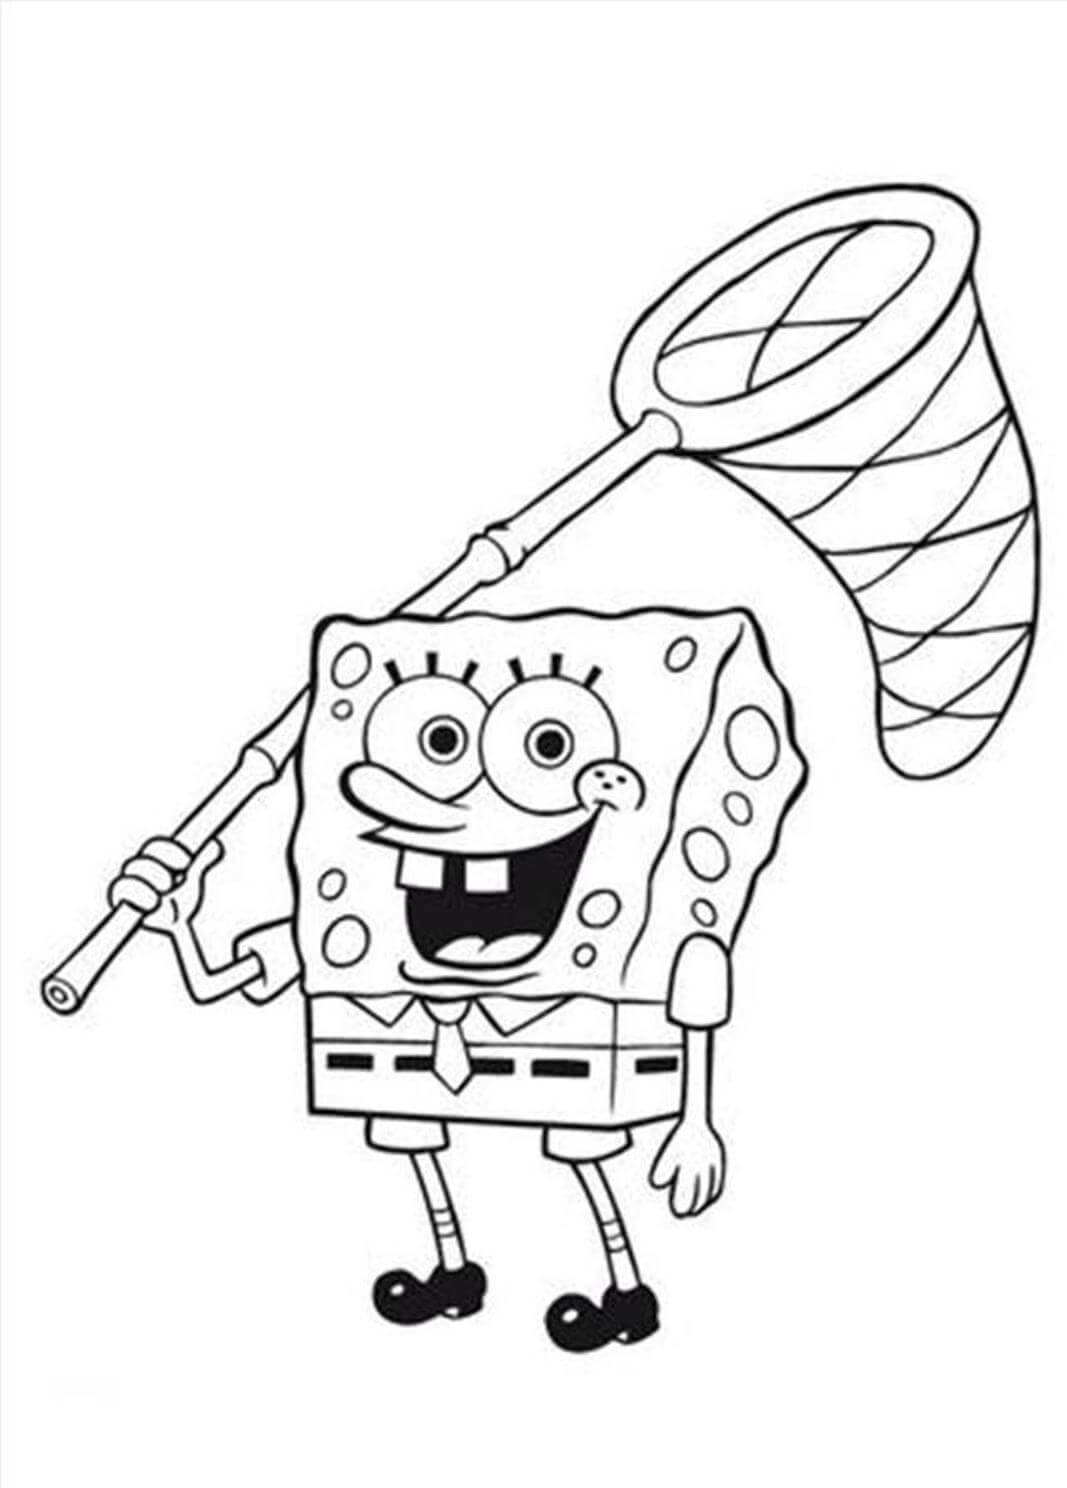 Spongebob Jellyfish Net Coloring Pages